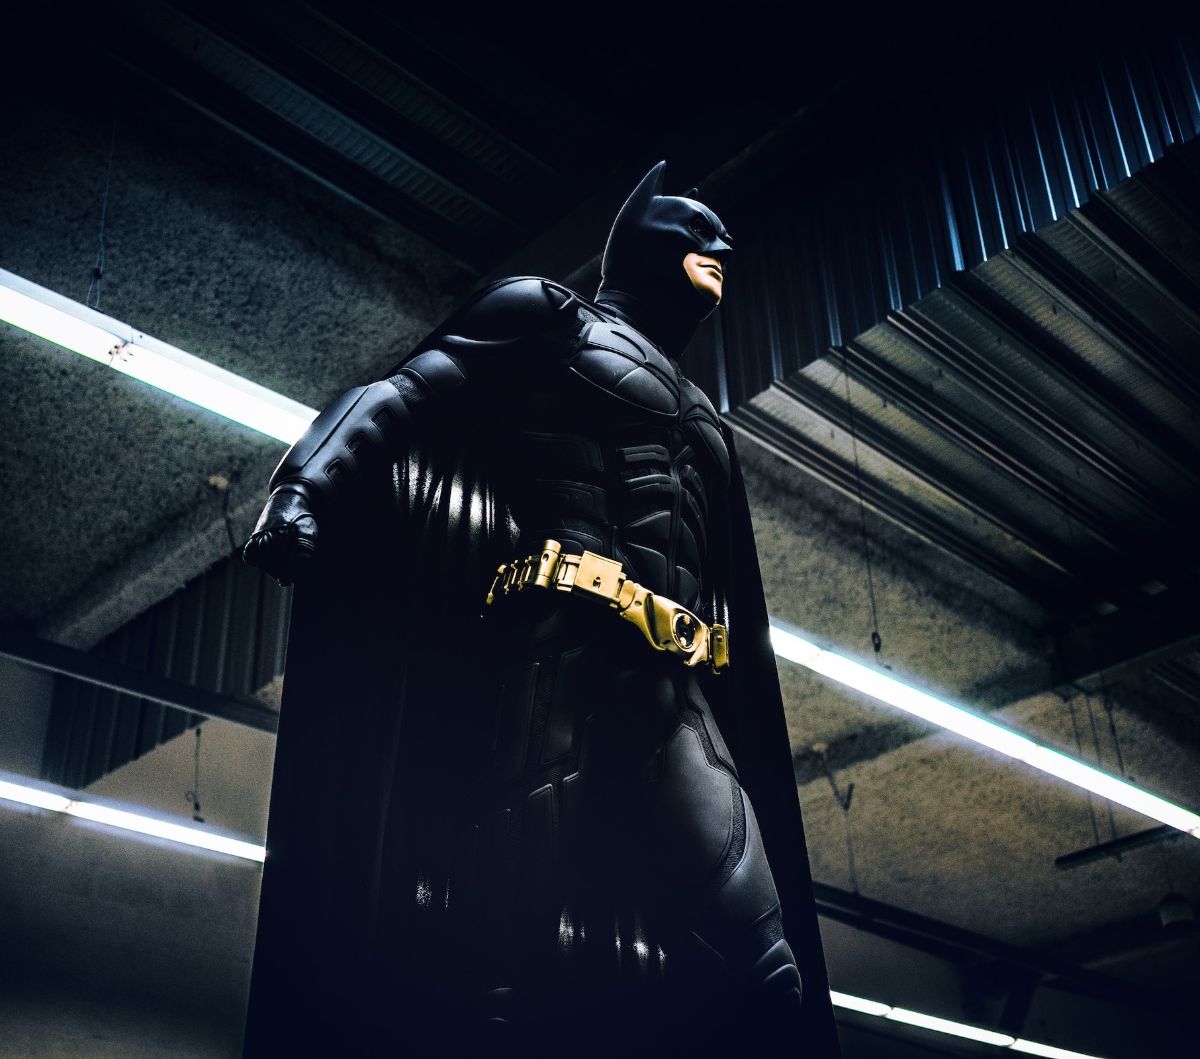 69 Batman Quotes on Life's Journey: Life Lessons from the Shadows